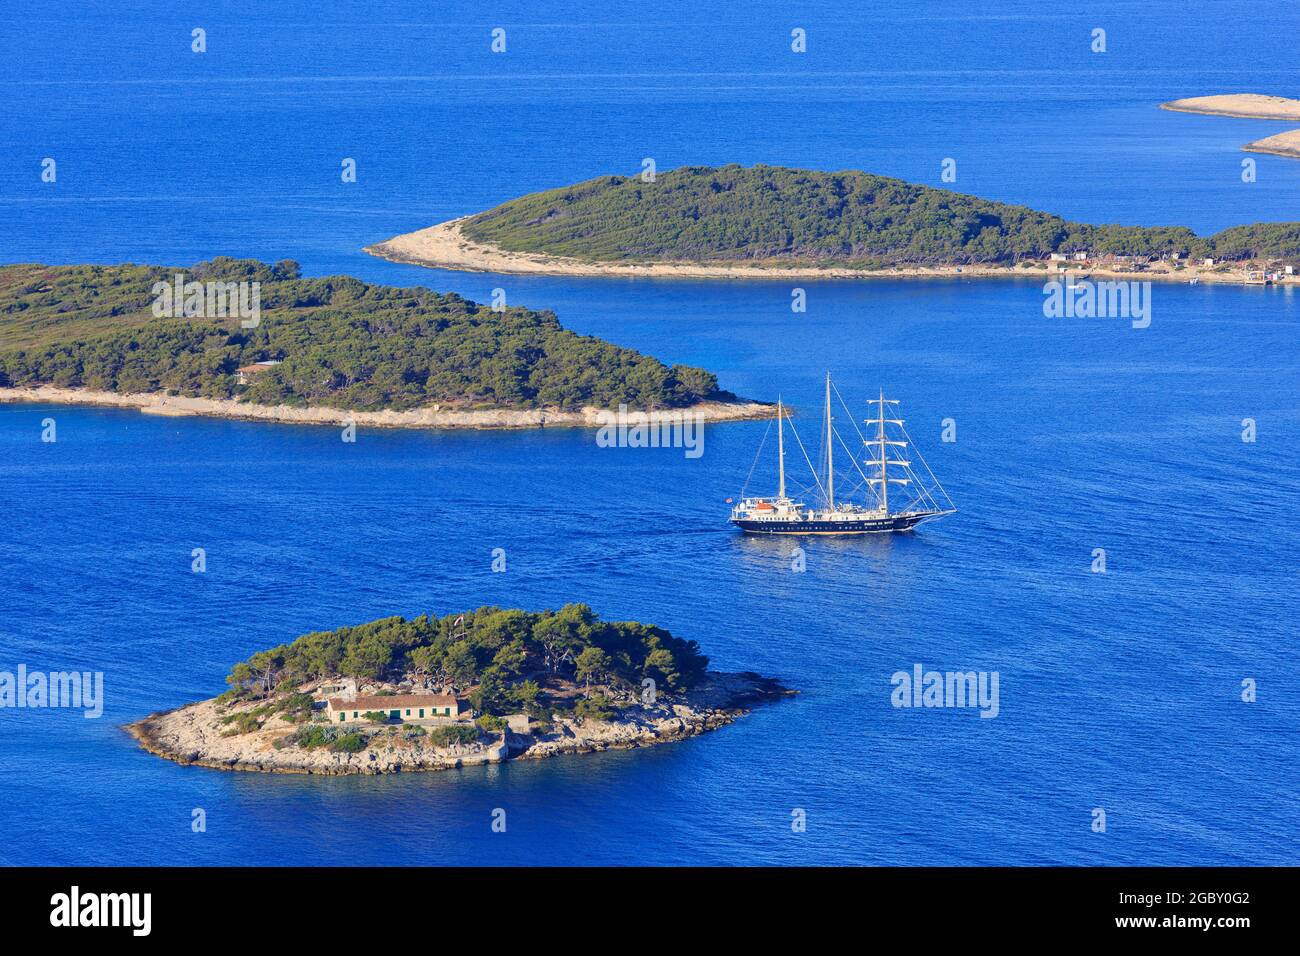 The gracious three-masted barquentine/sailship 'Running on Waves' sailing past Hvar & the Paklinski islands in Croatia Stock Photo